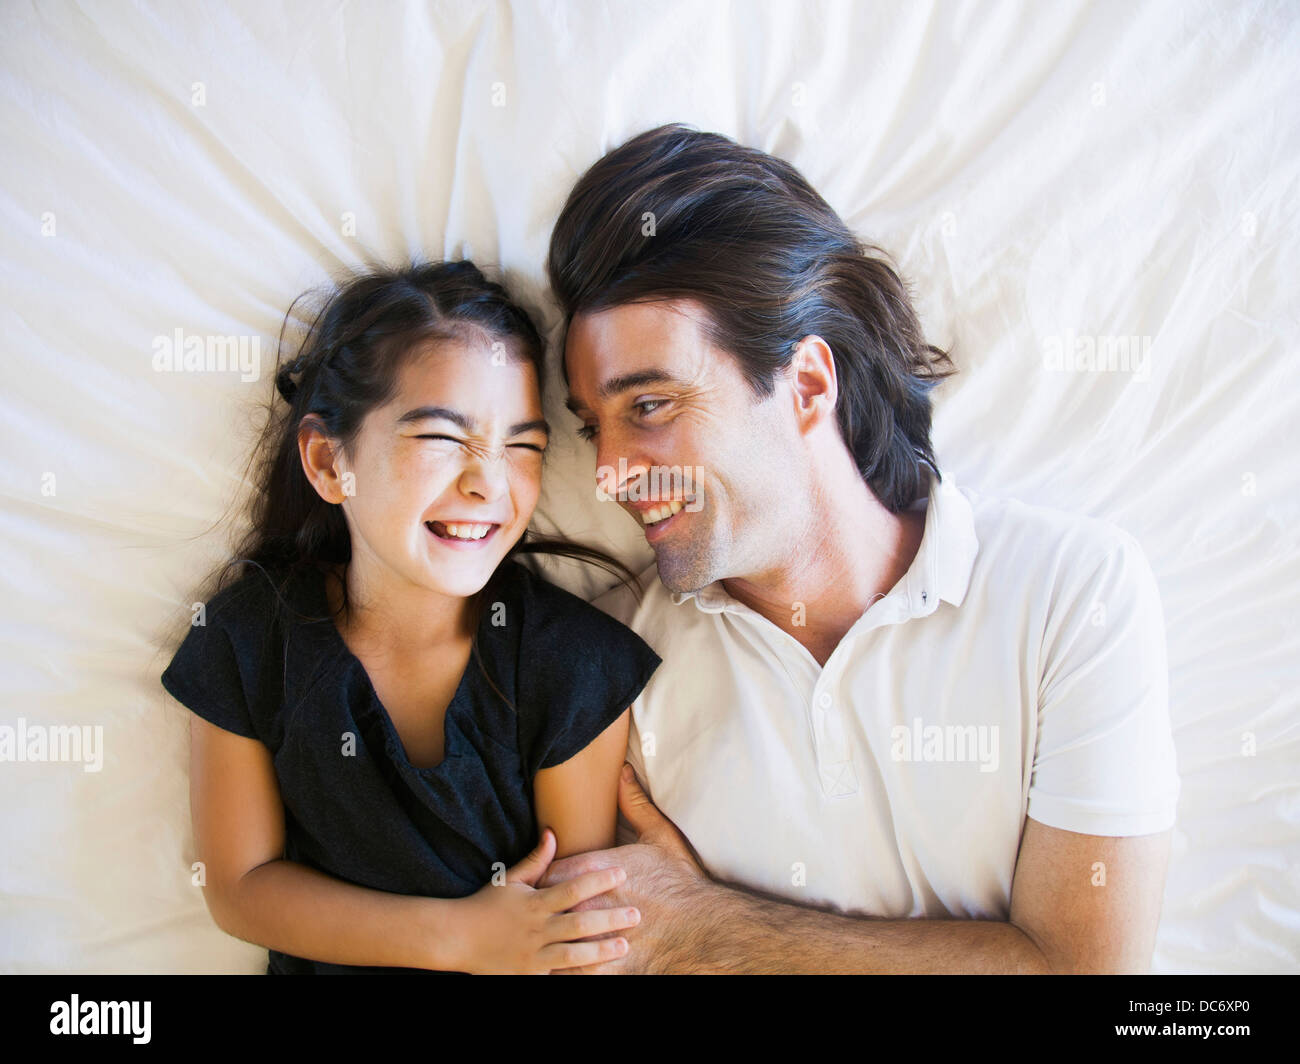 Father with daughter (8-9) laughing Stock Photo